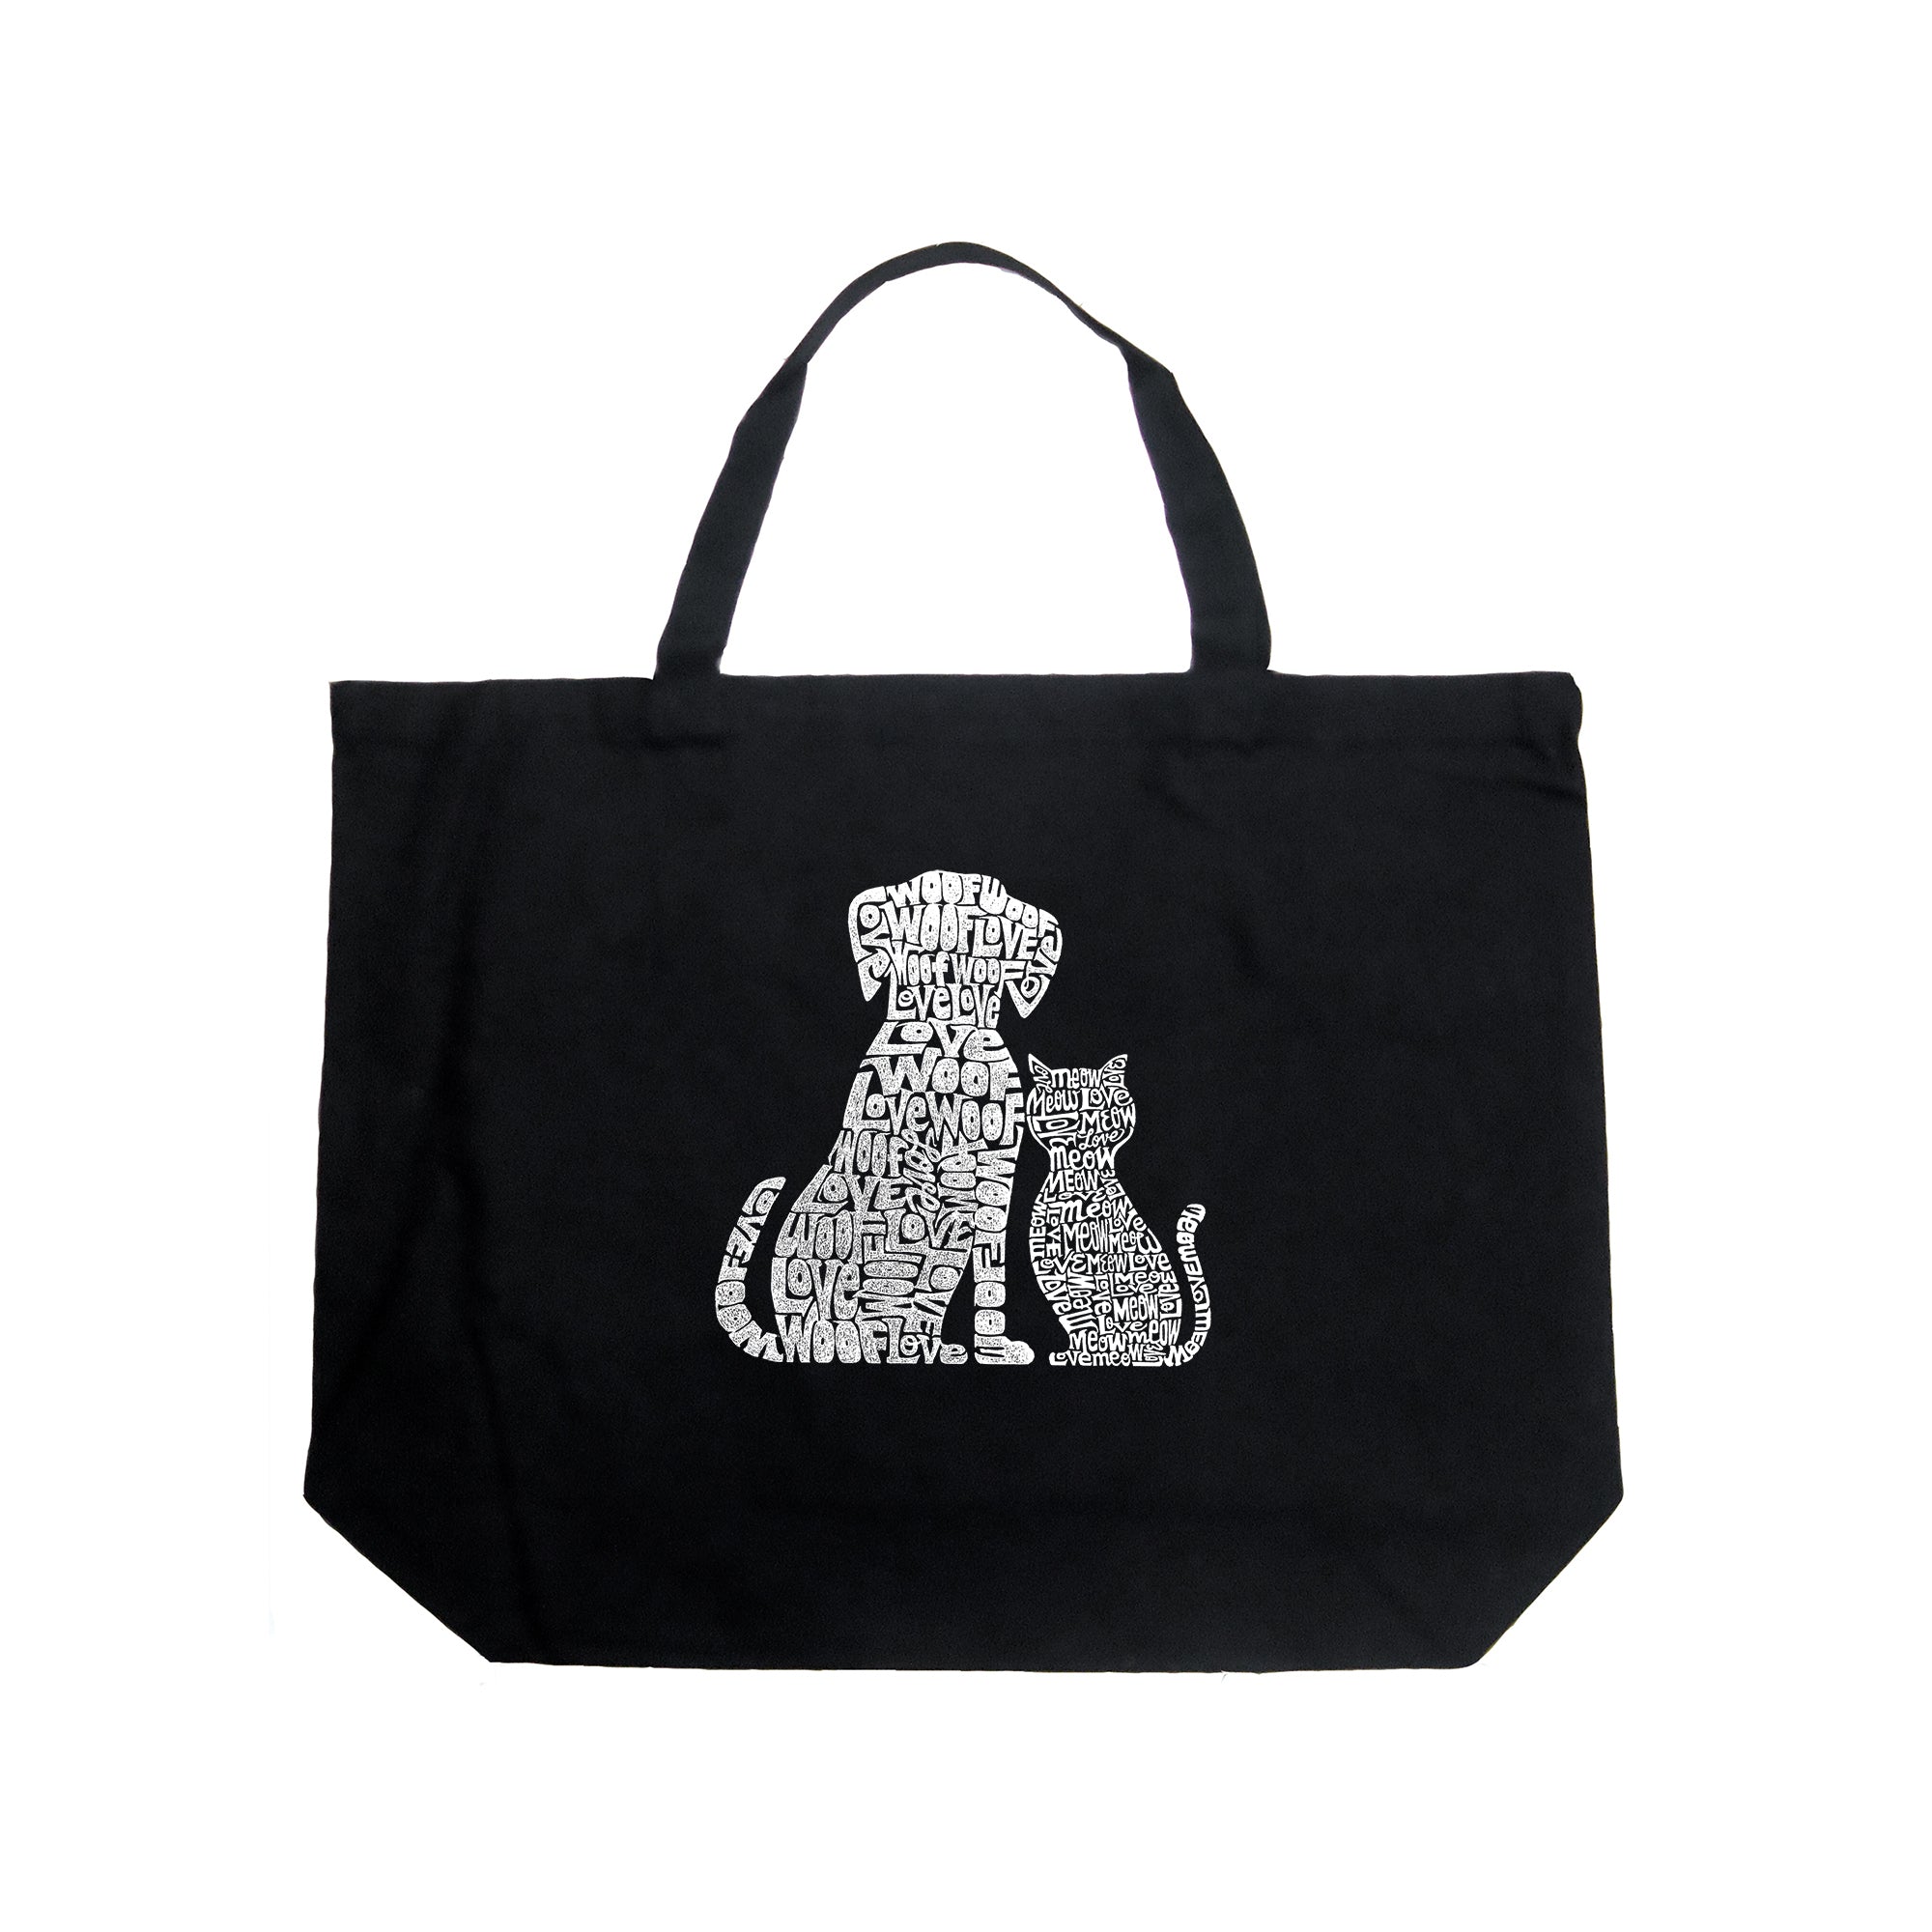 Large Word Art Tote Bag - Dogs And Cats - Large - Royal